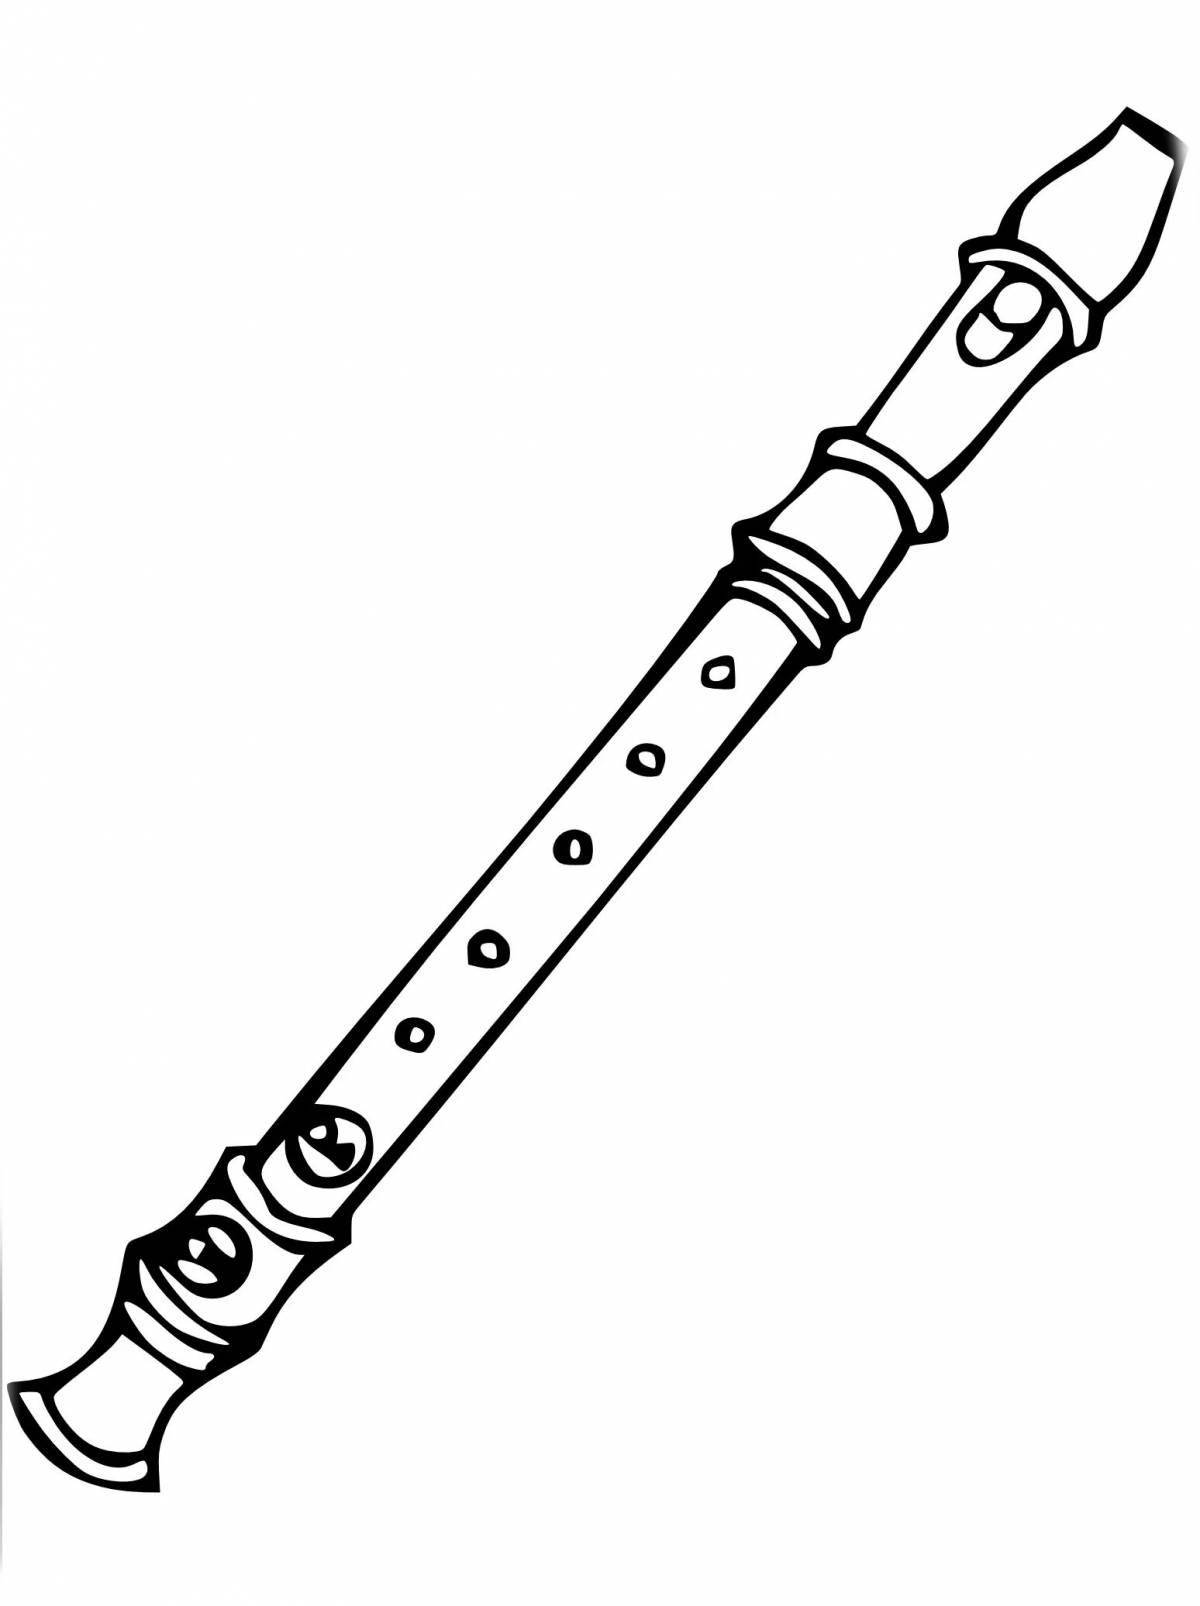 Animated flute coloring page